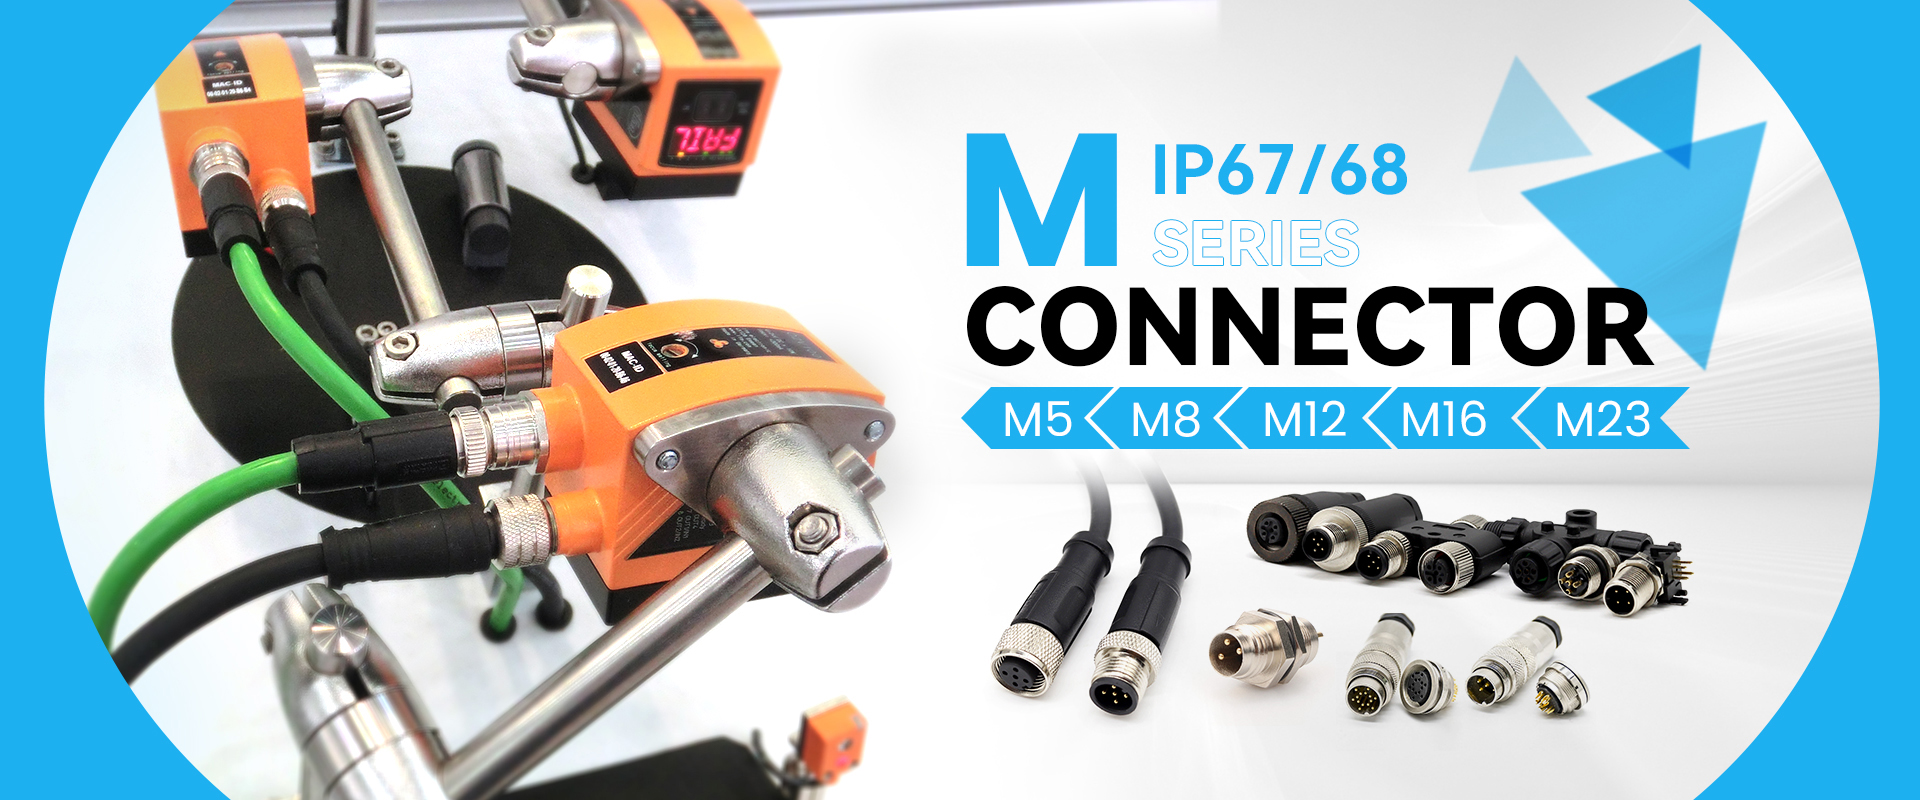 M Series Connector